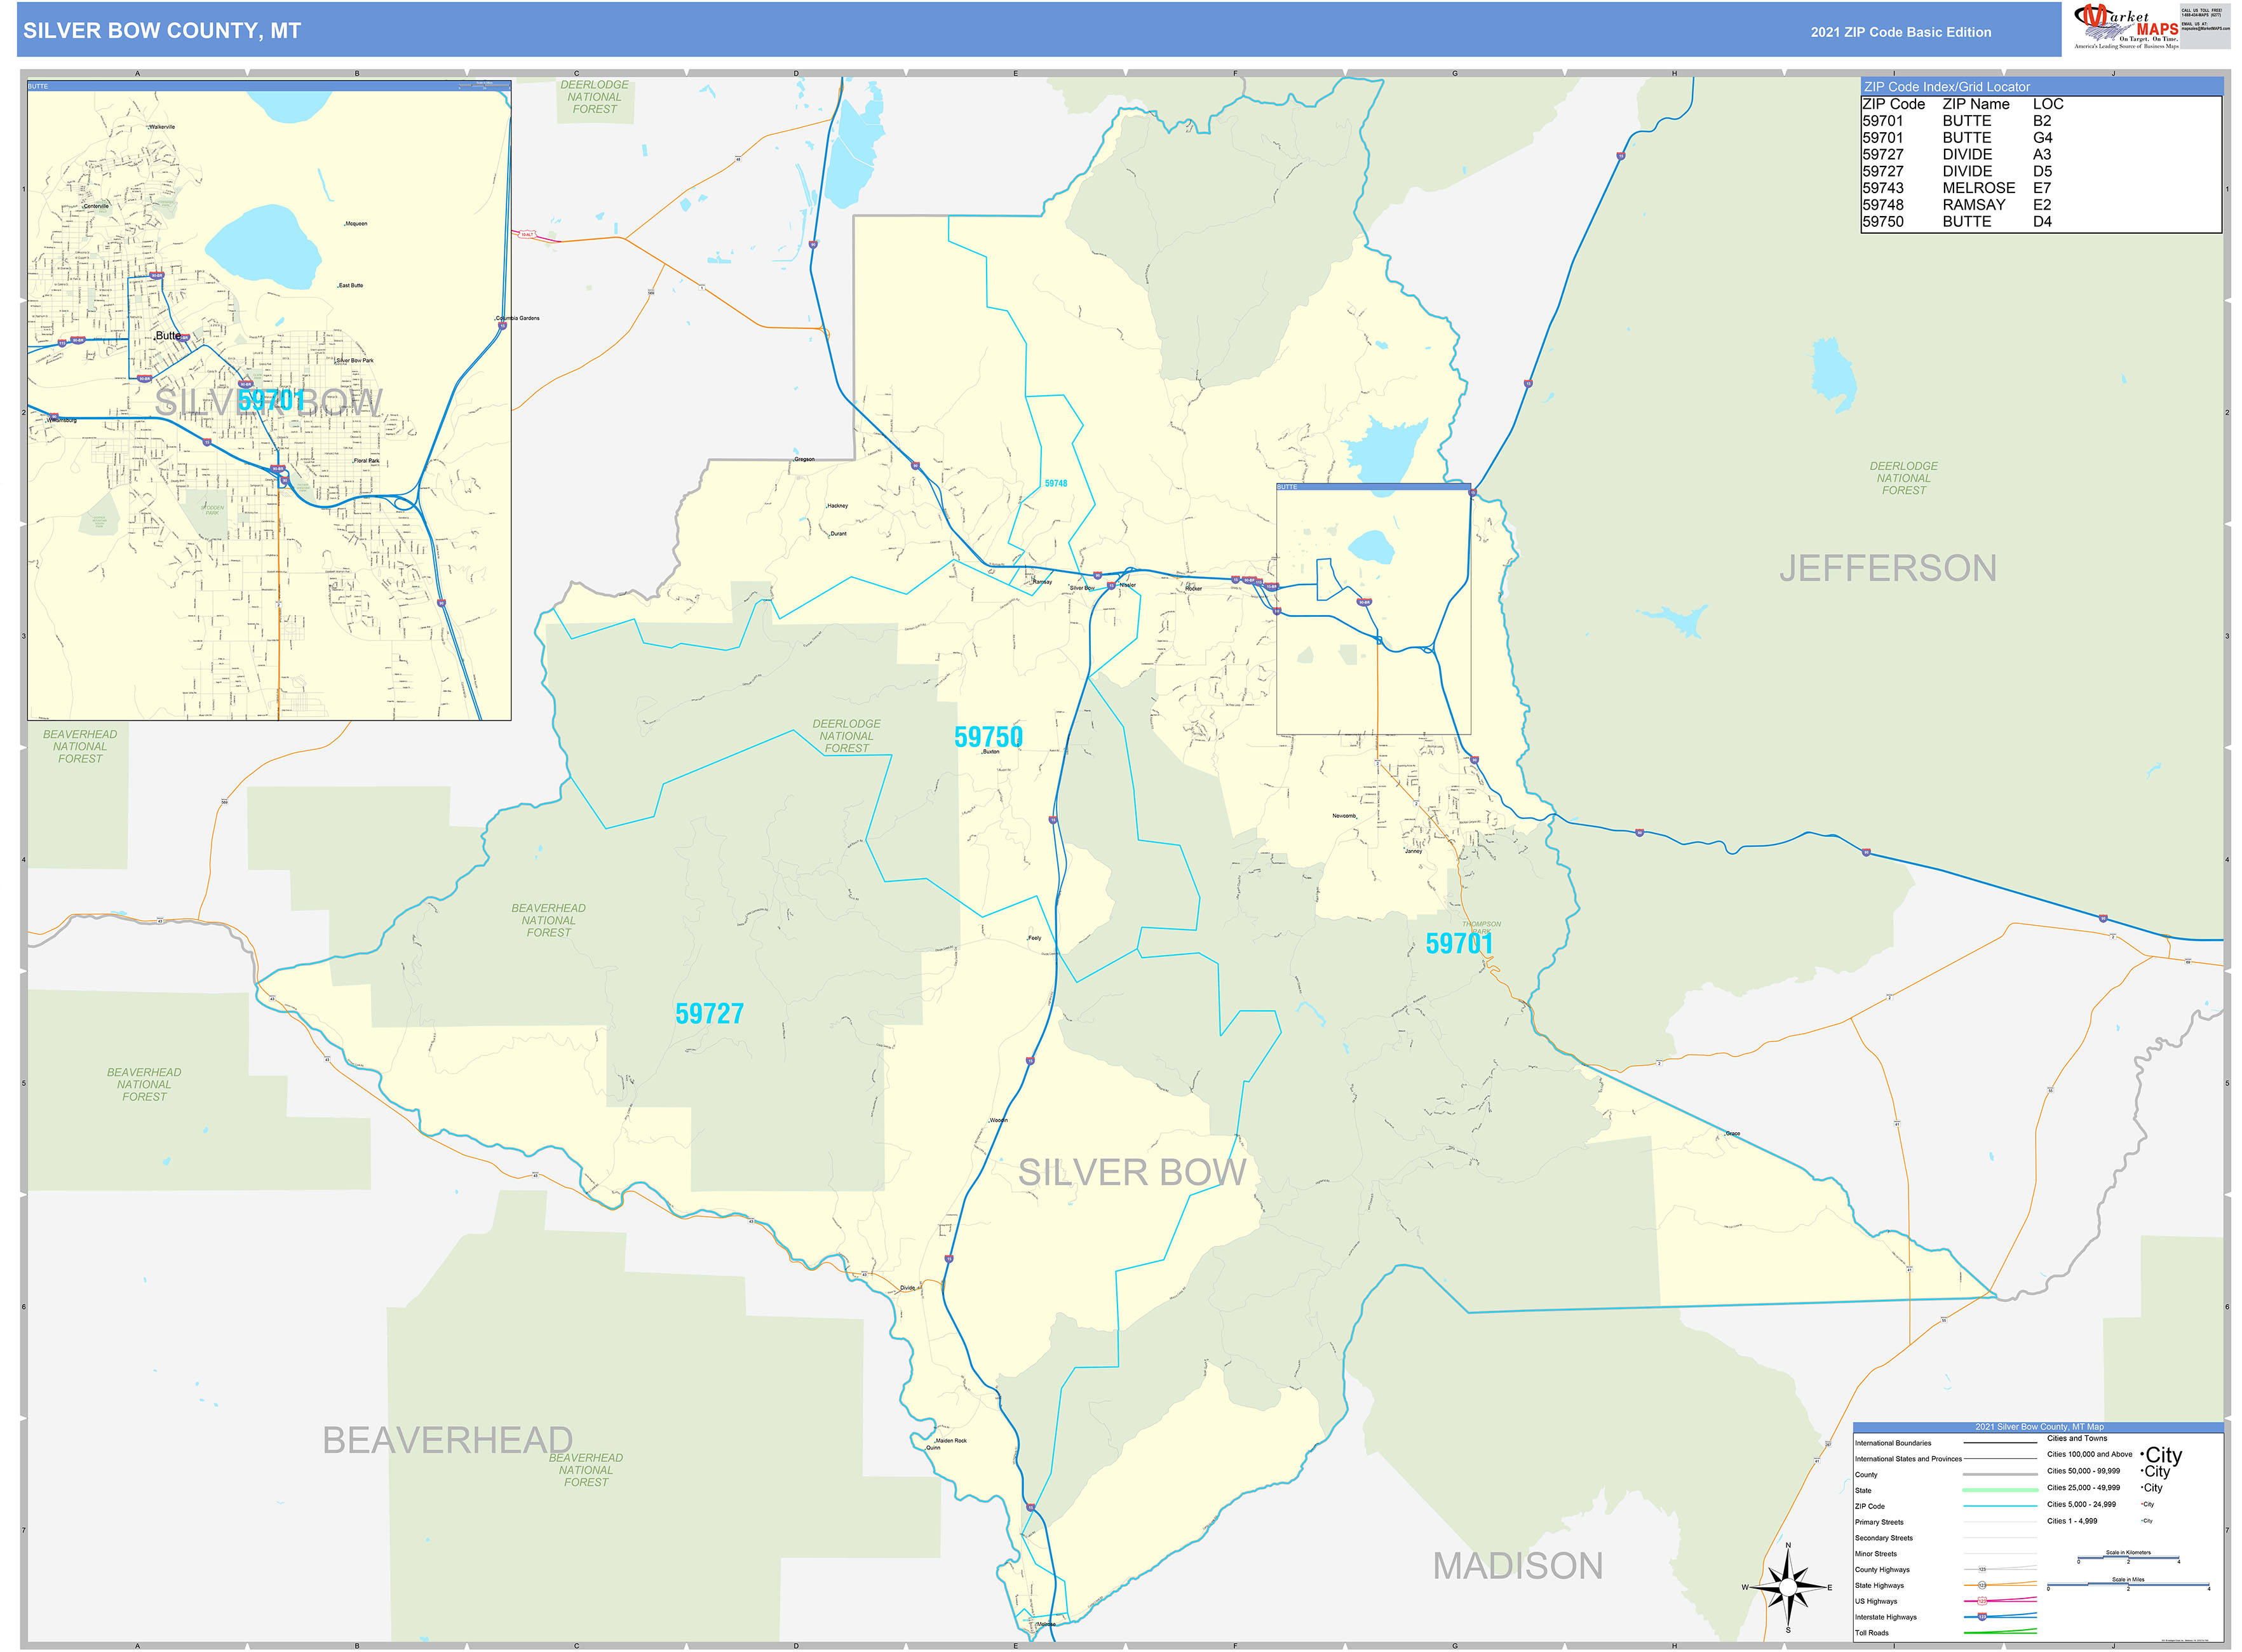 Silver Bow County, MT Zip Code Wall Map Basic Style by MarketMAPS